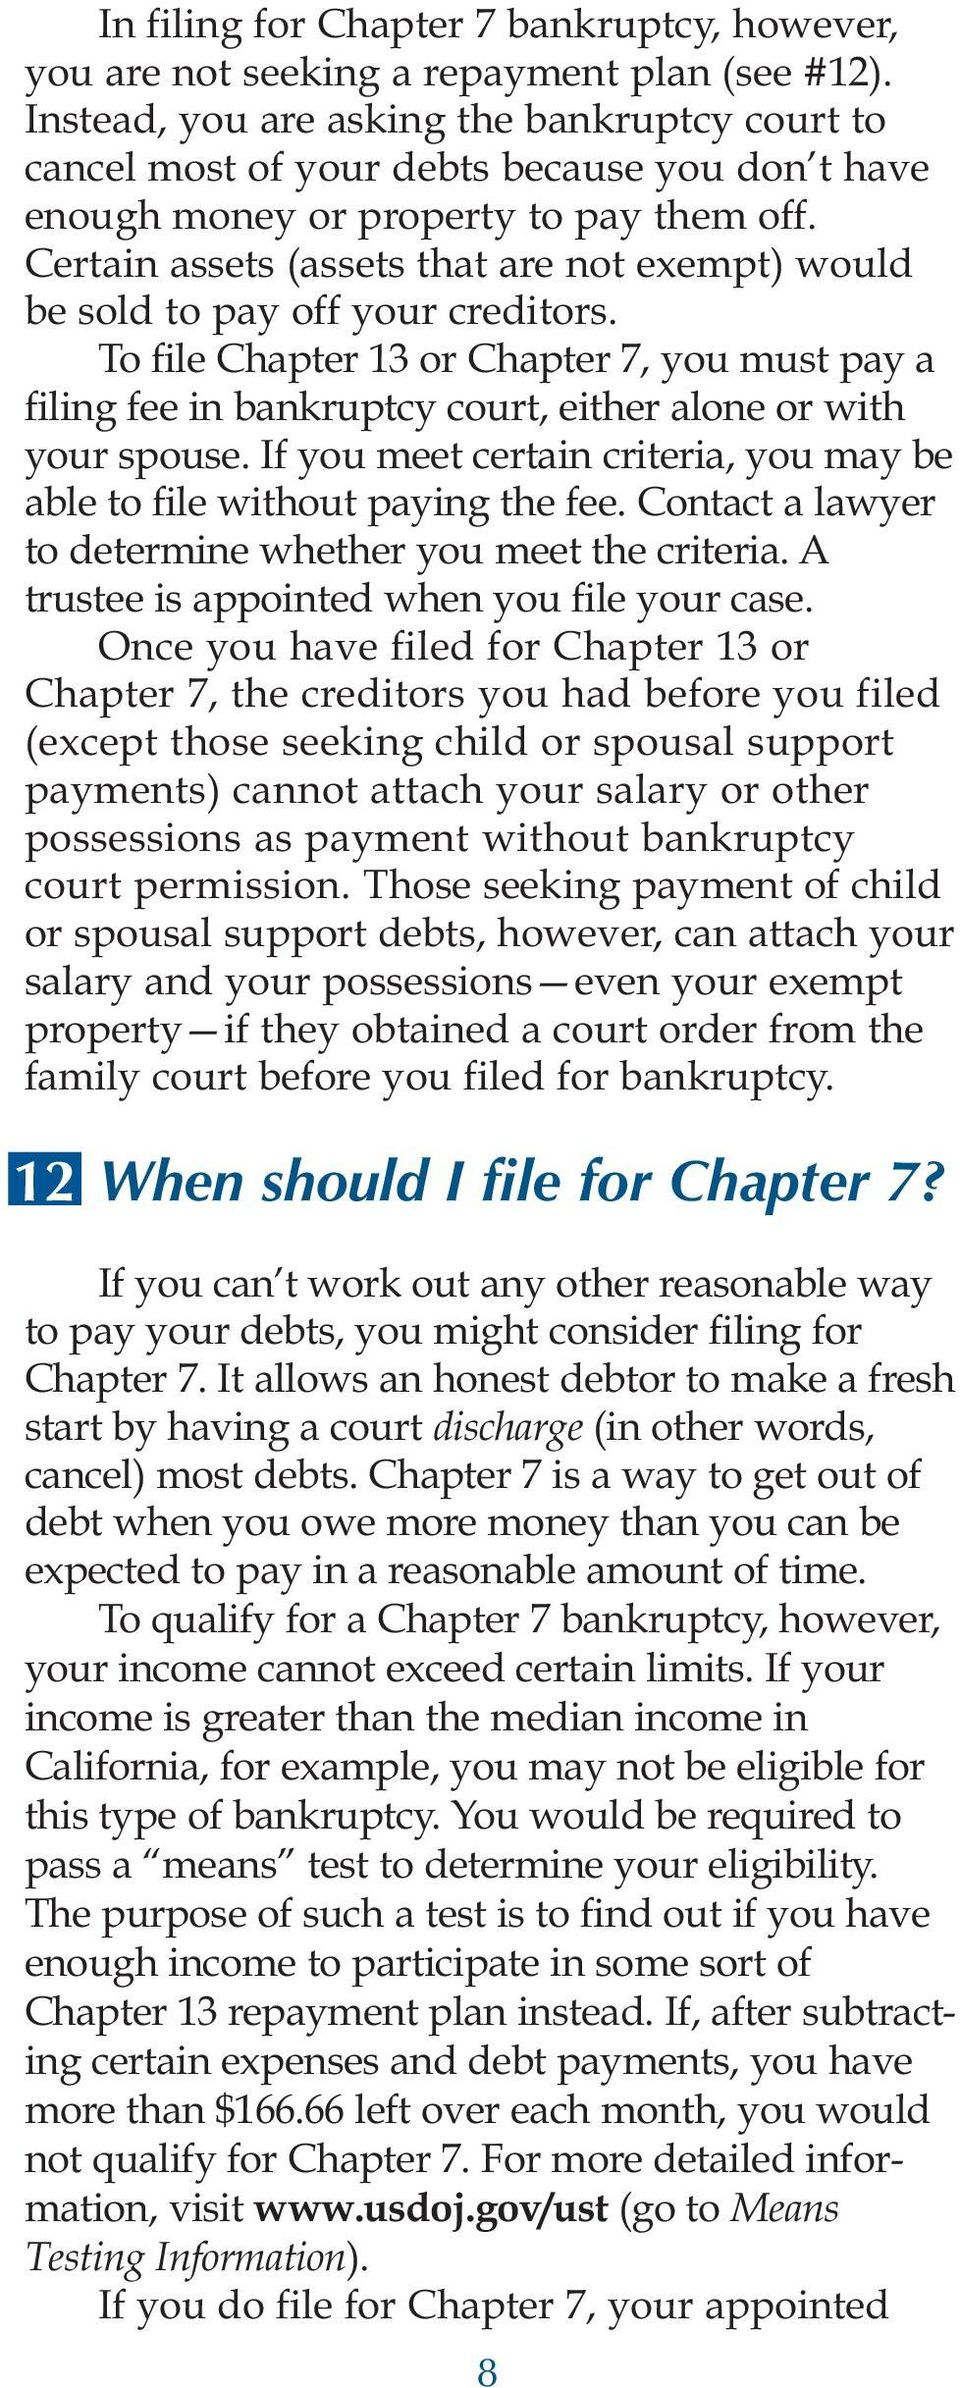 Certain assets (assets that are not exempt) would be sold to pay off your creditors. To file Chapter 13 or Chapter 7, you must pay a filing fee in bankruptcy court, either alone or with your spouse.